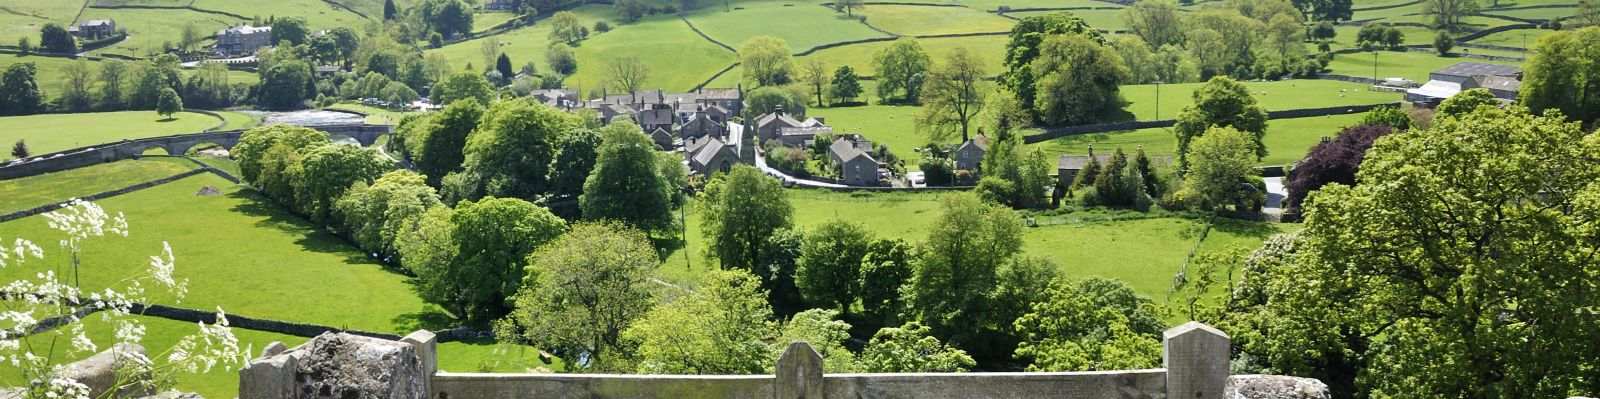 Holiday Cottages In The Yorkshire Dales To Rent Self Catering